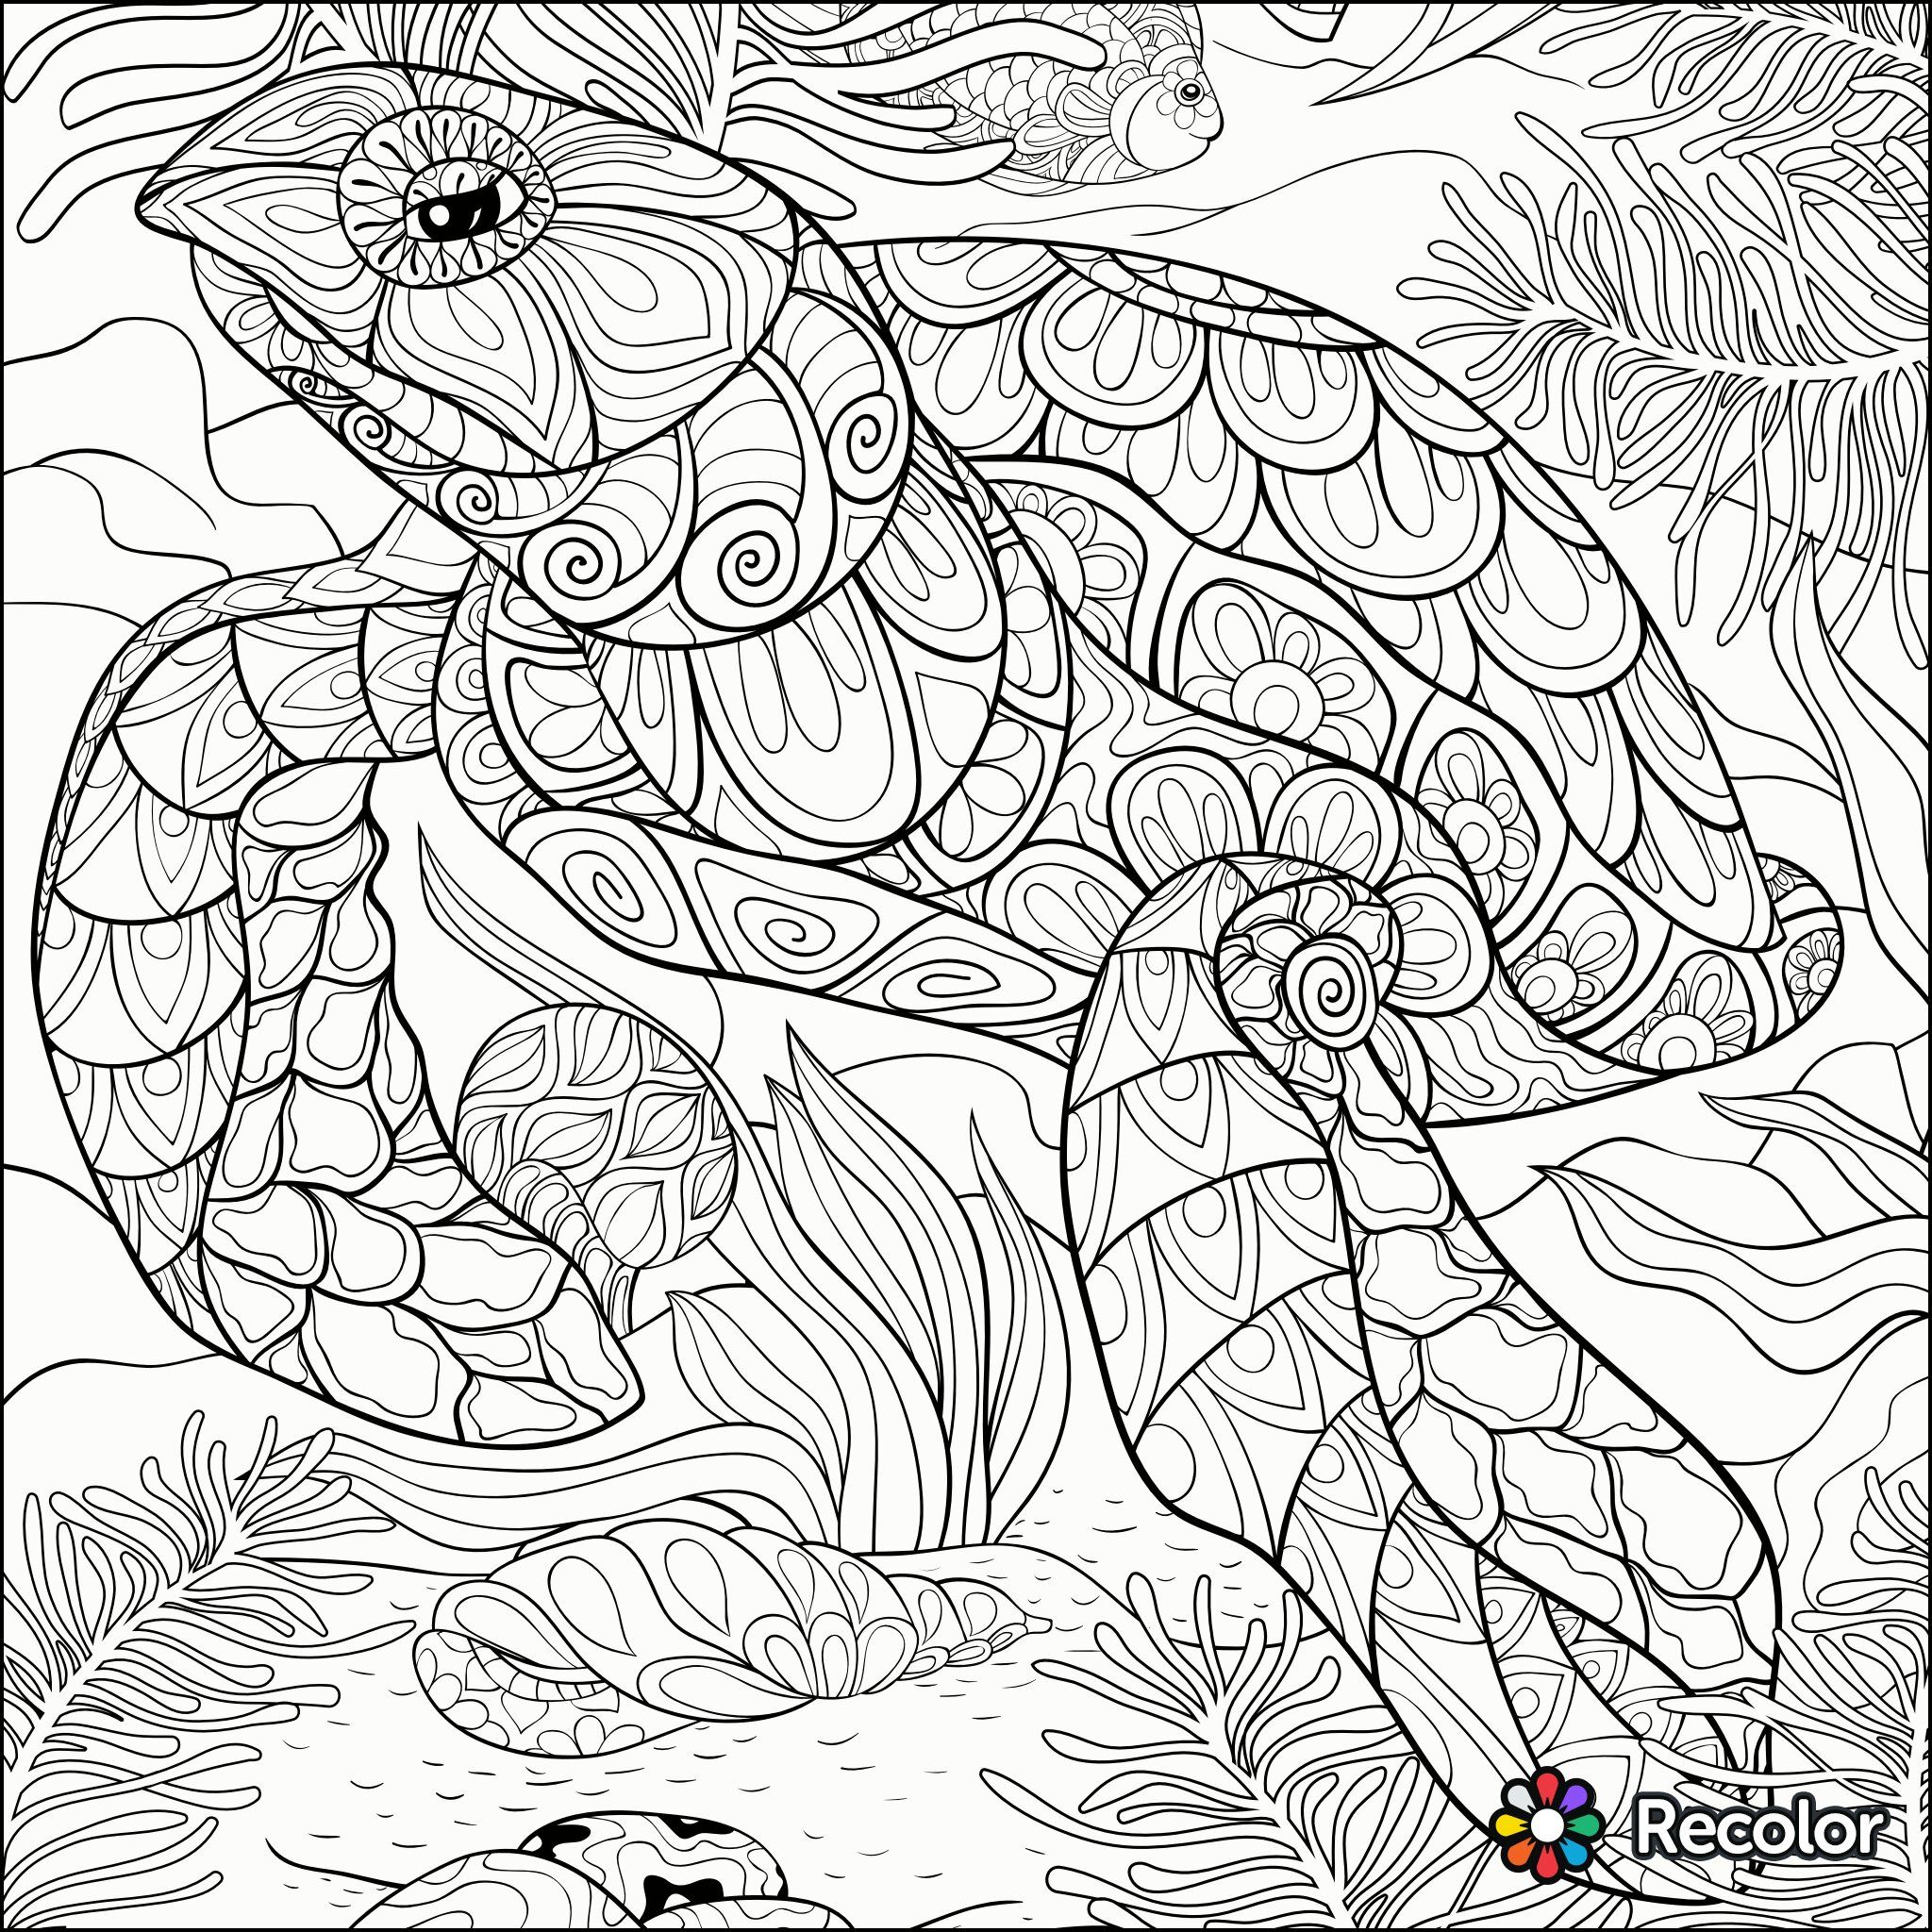 Turtle Coloring Page   Recolor App   Turtle Coloring Pages, Animal ...